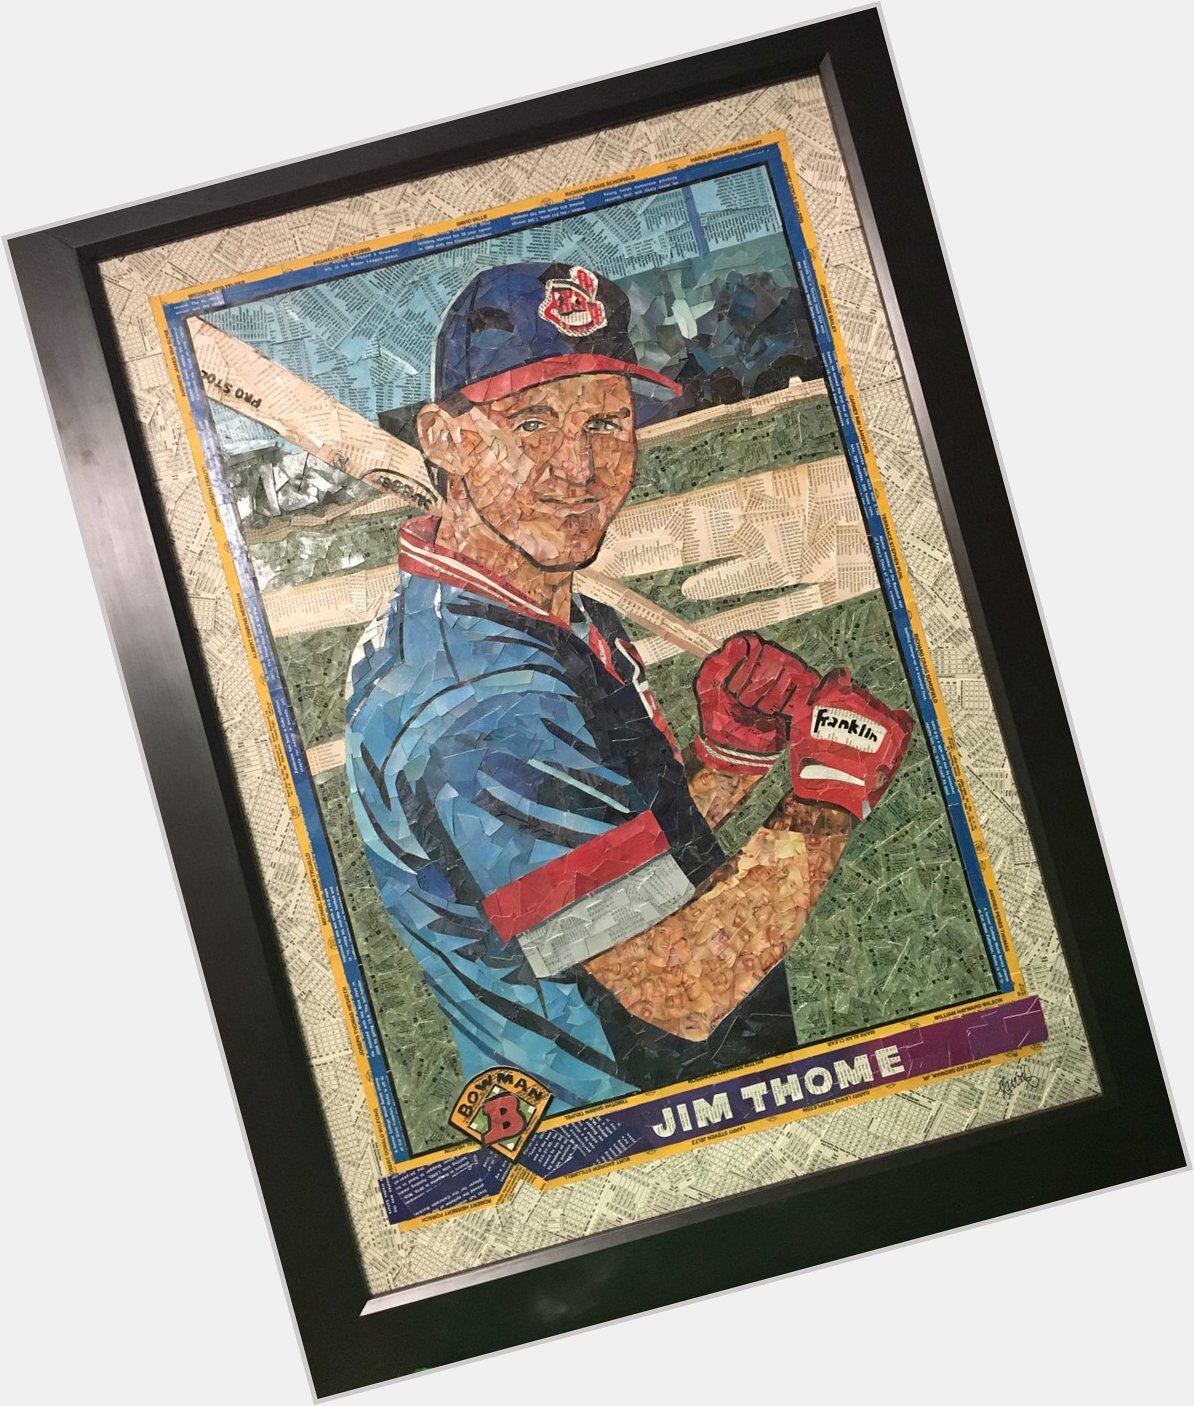 Happy 48th Birthday, Jim Thome! Here is his 1991 Bowman RC, made from cut common baseball cards. 